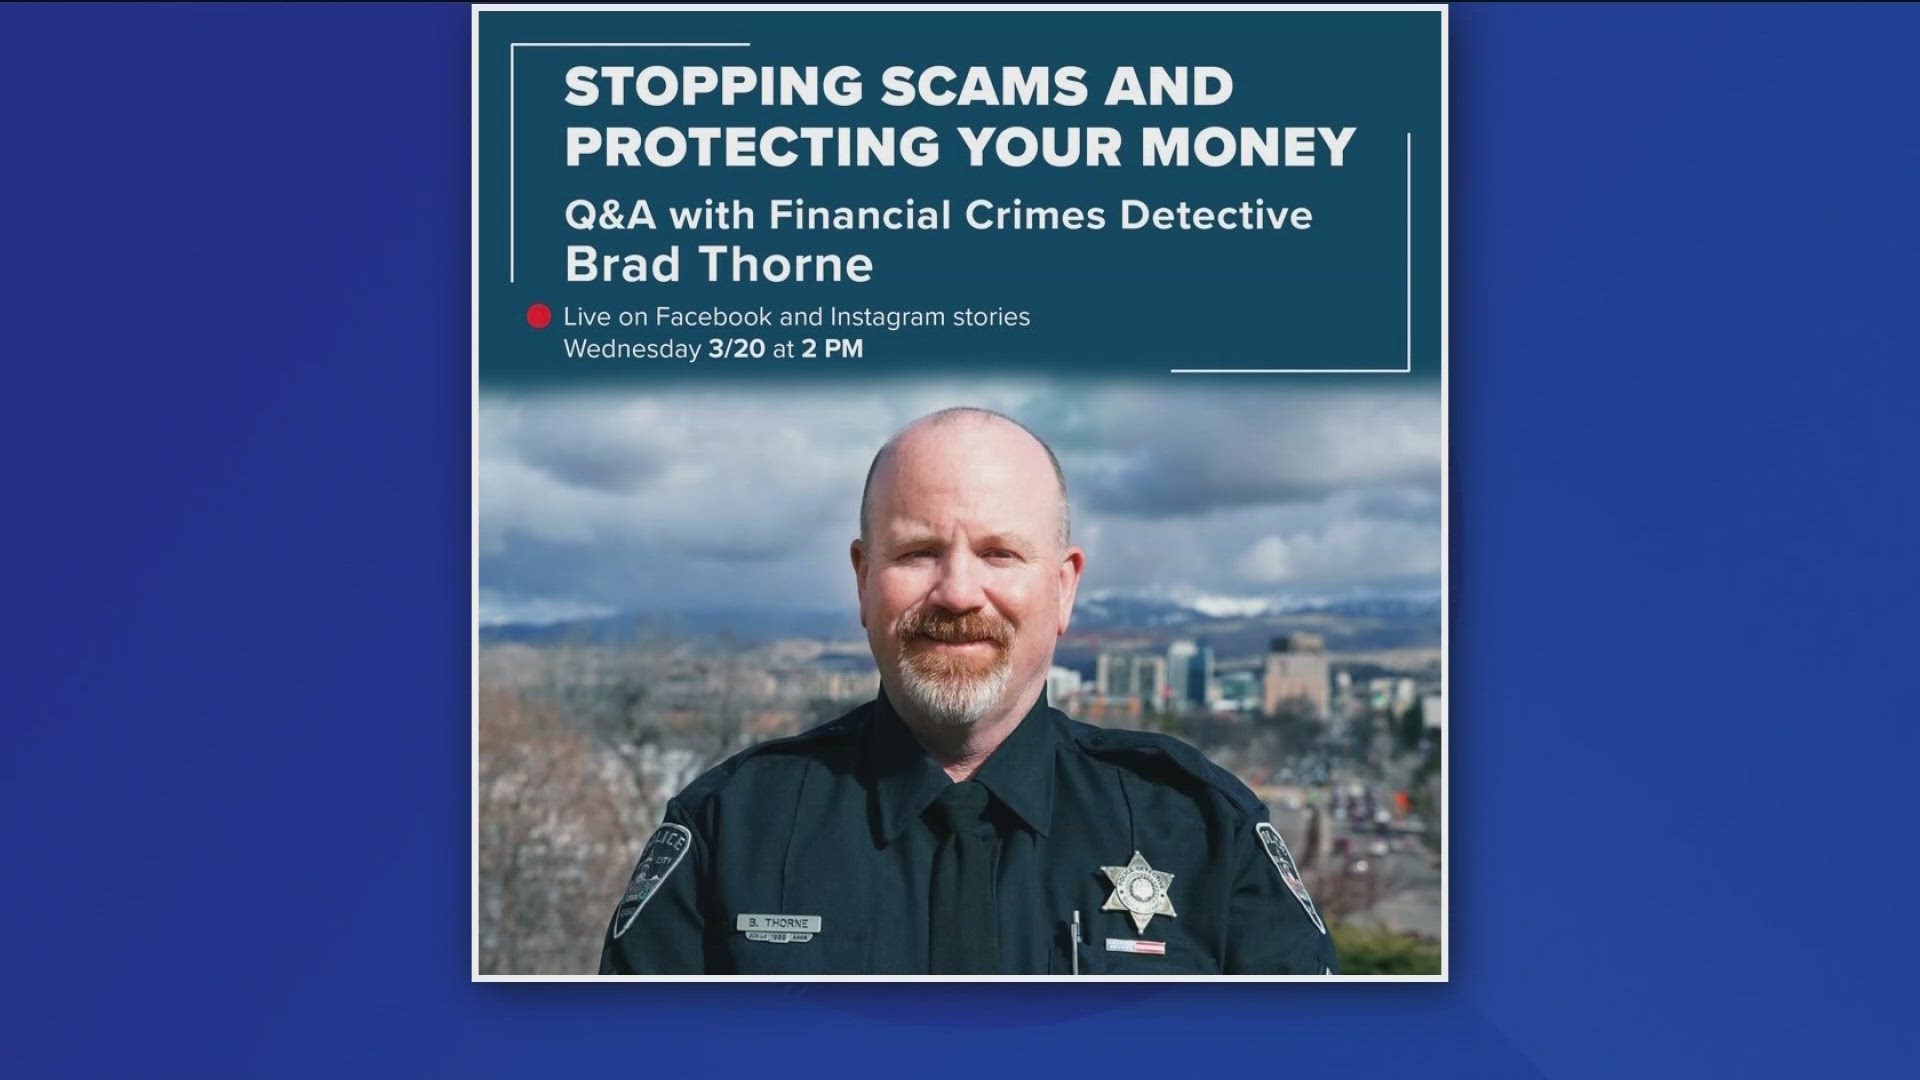 Detective Brad Thorne will answer questions via social media about scams and how to avoid being a victim.